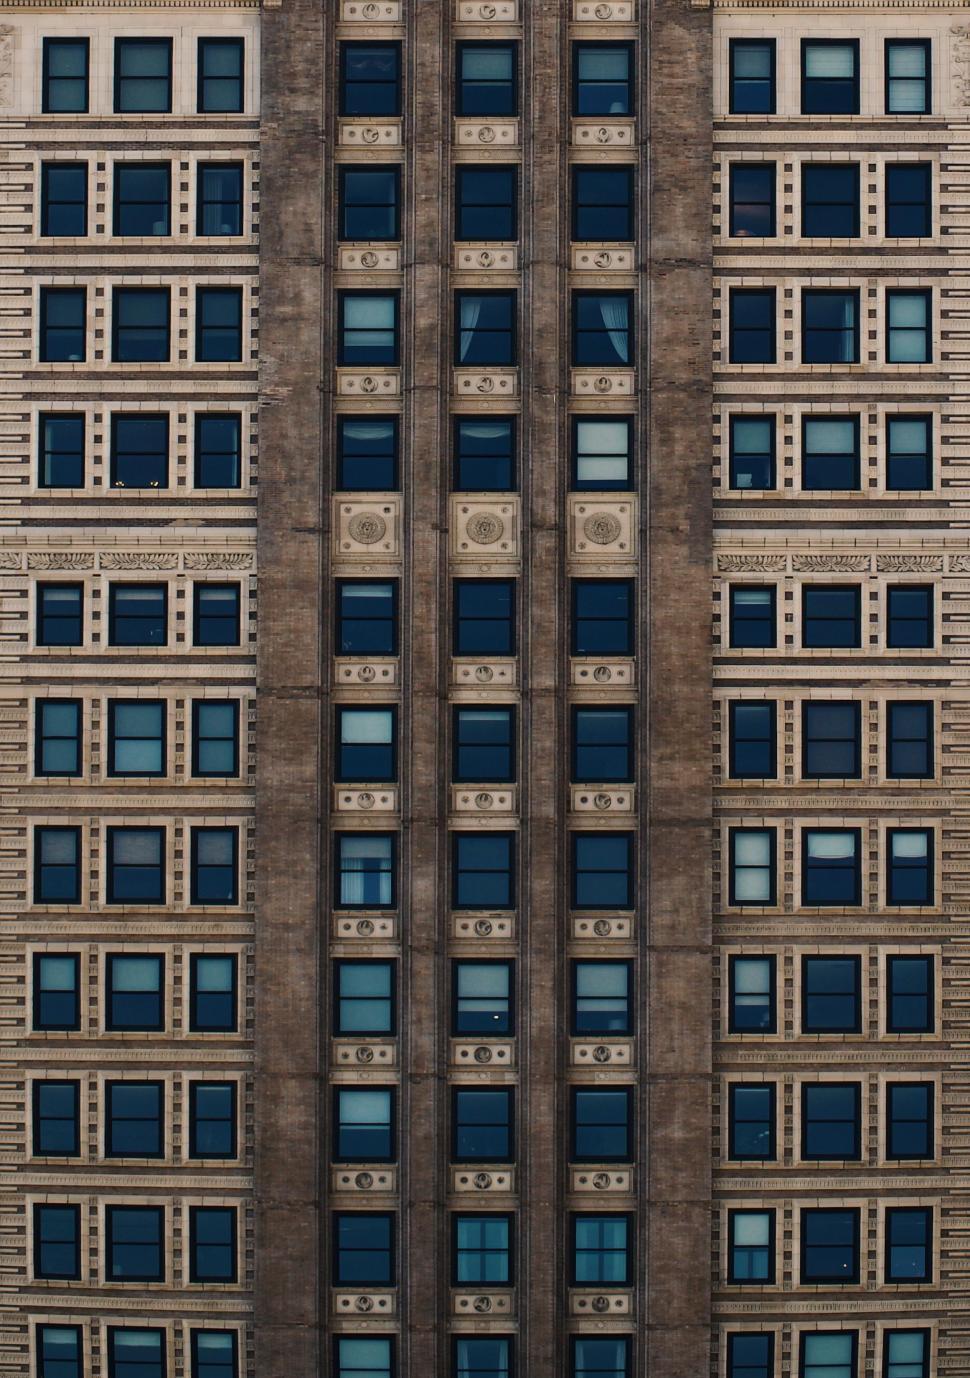 Free Image of building architecture city urban construction apartment window exterior housing modern windows buildings skyscraper sky glass office structure tower house facade downtown business tall high wall building complex home street 